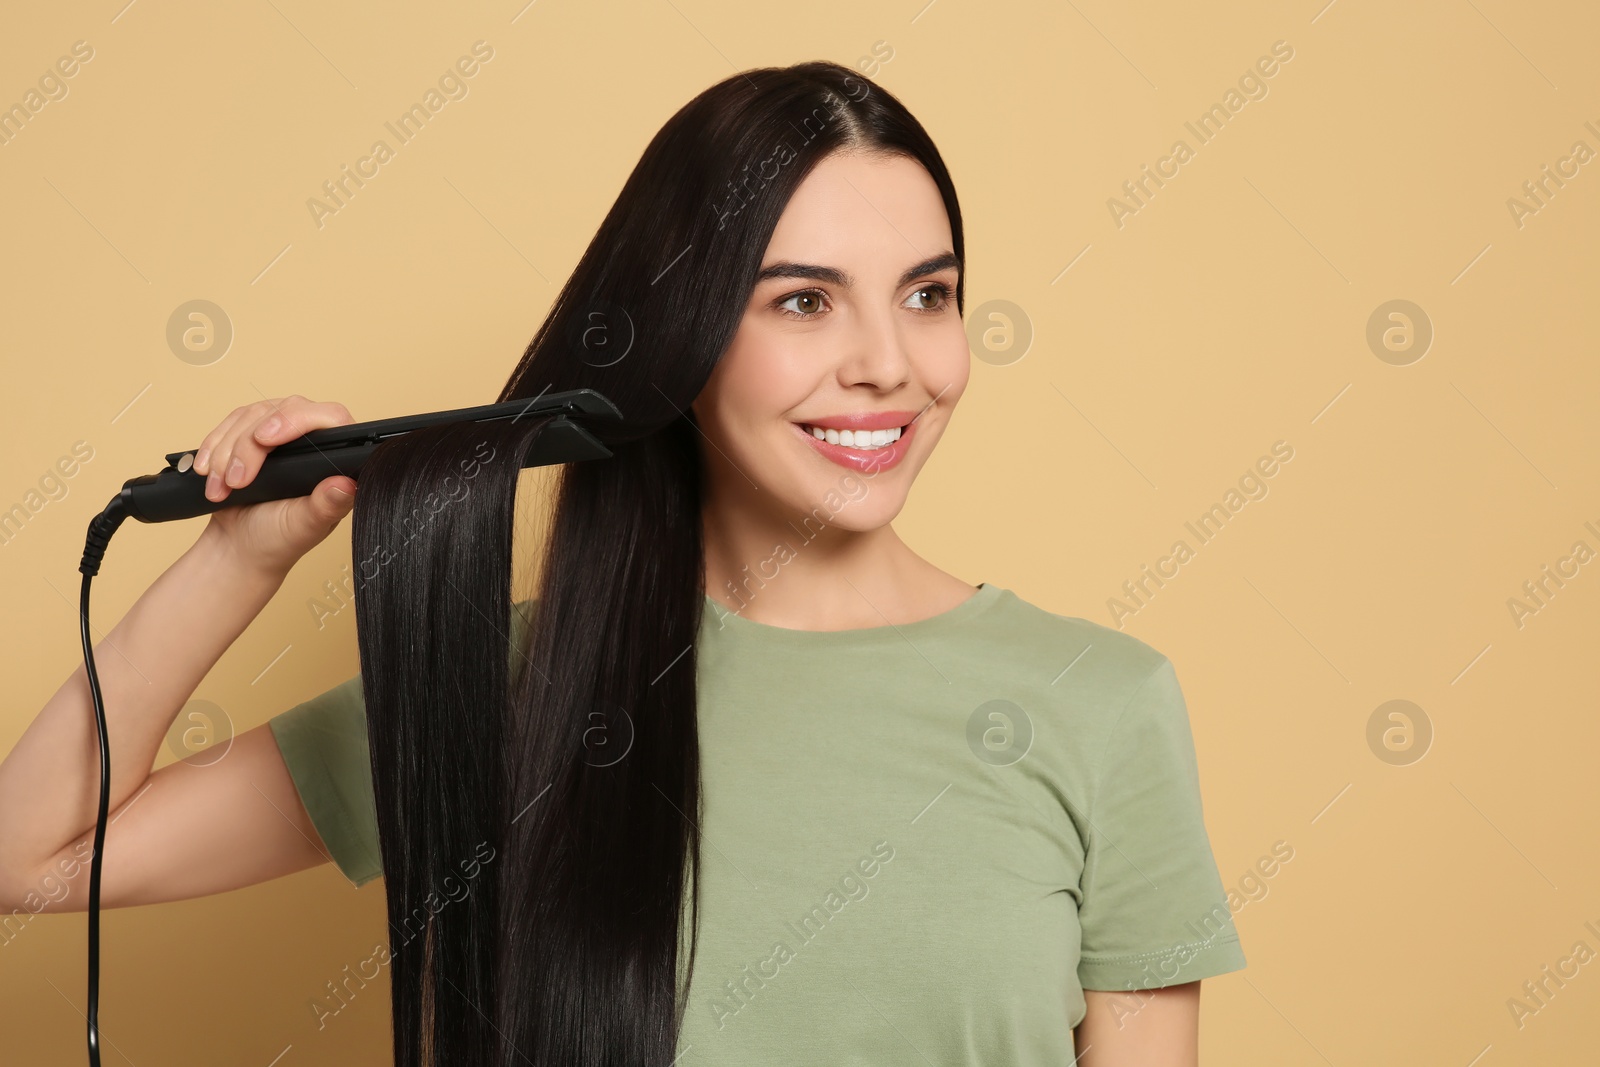 Photo of Beautiful happy woman using hair iron on beige background